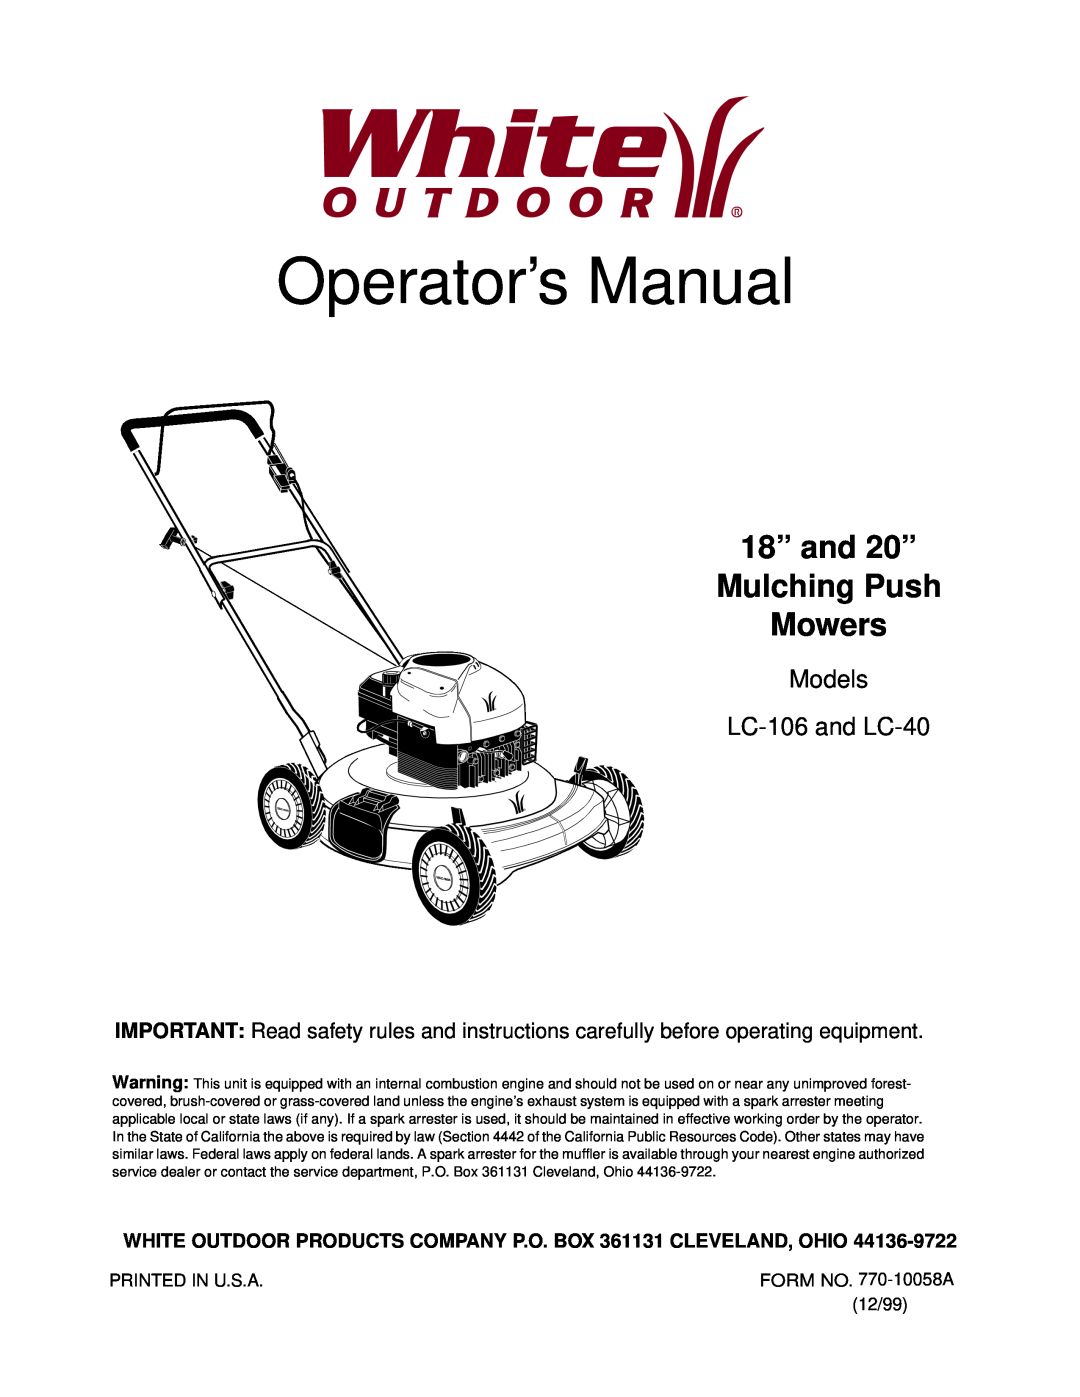 White manual Operator’s Manual, 18” and 20” Mulching Push Mowers, Models LC-106and LC-40 